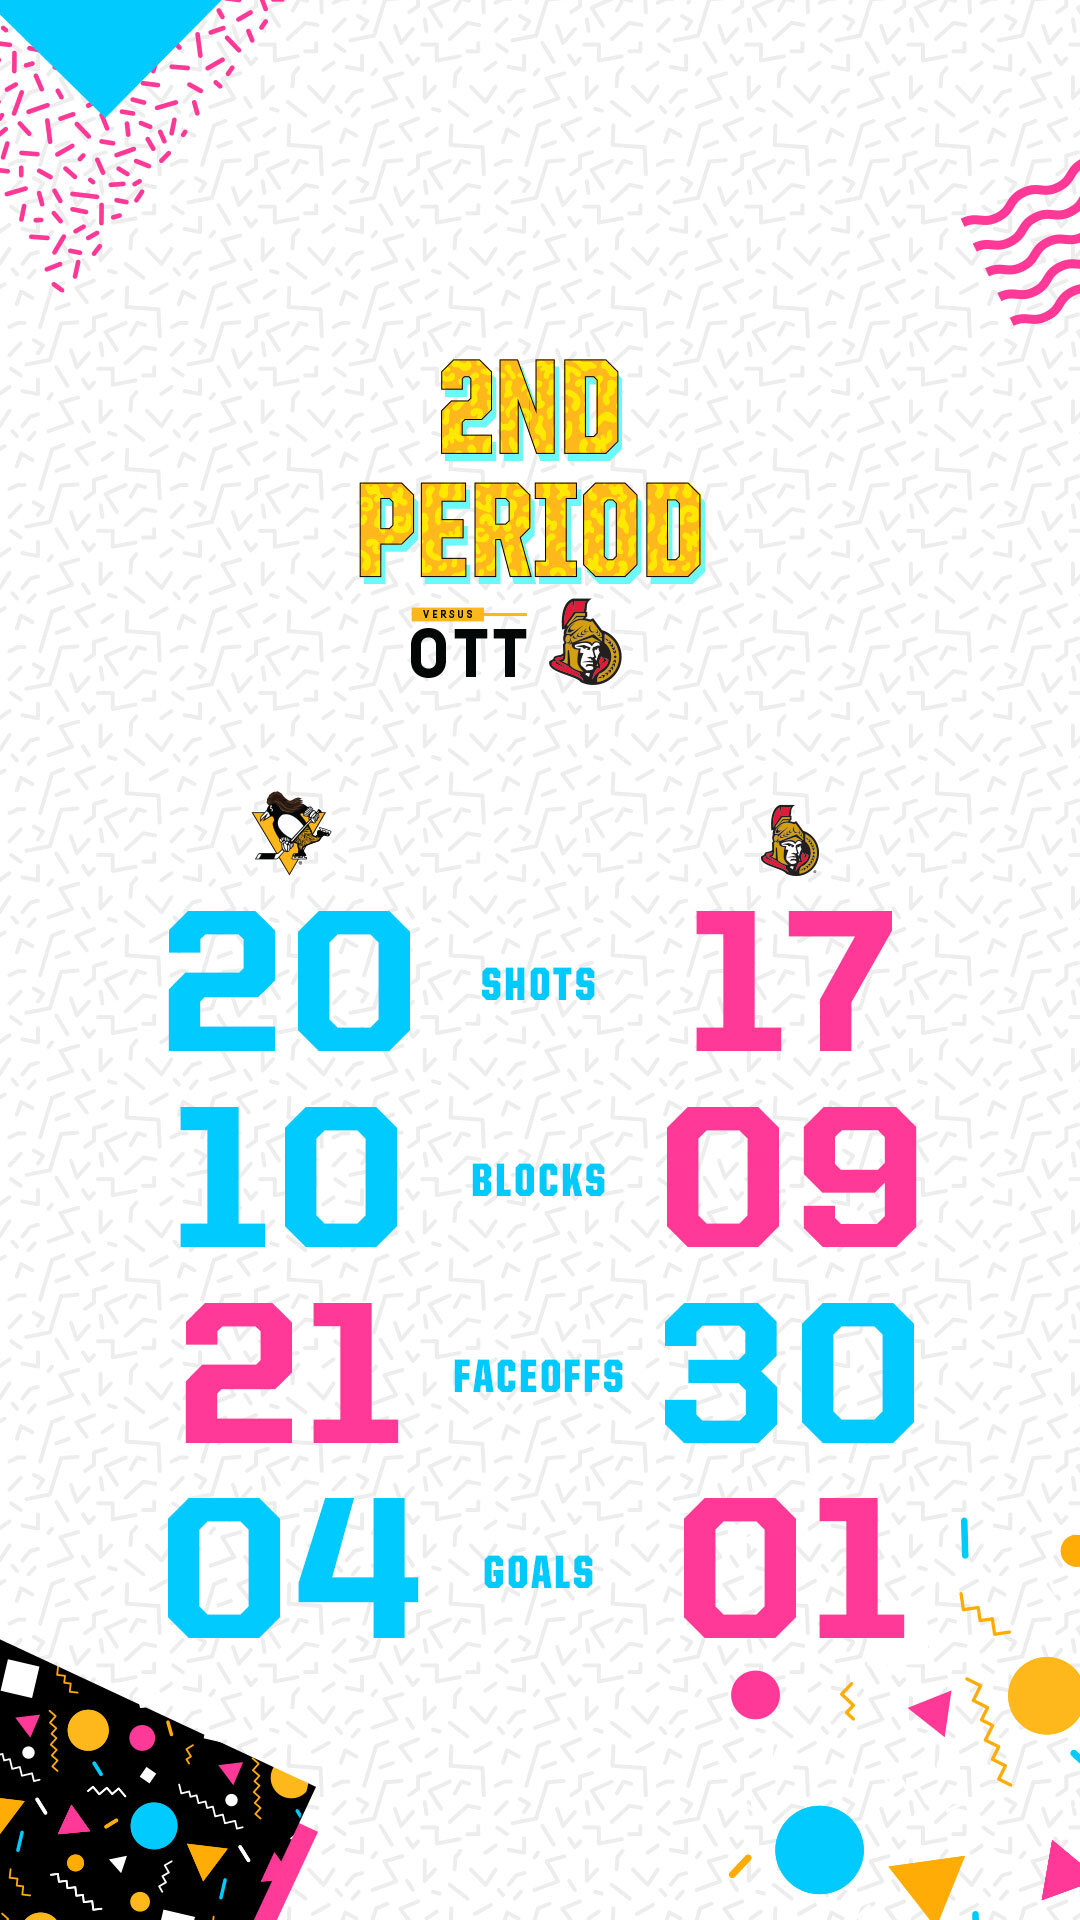 '90s Night 2nd Period Stats Graphic